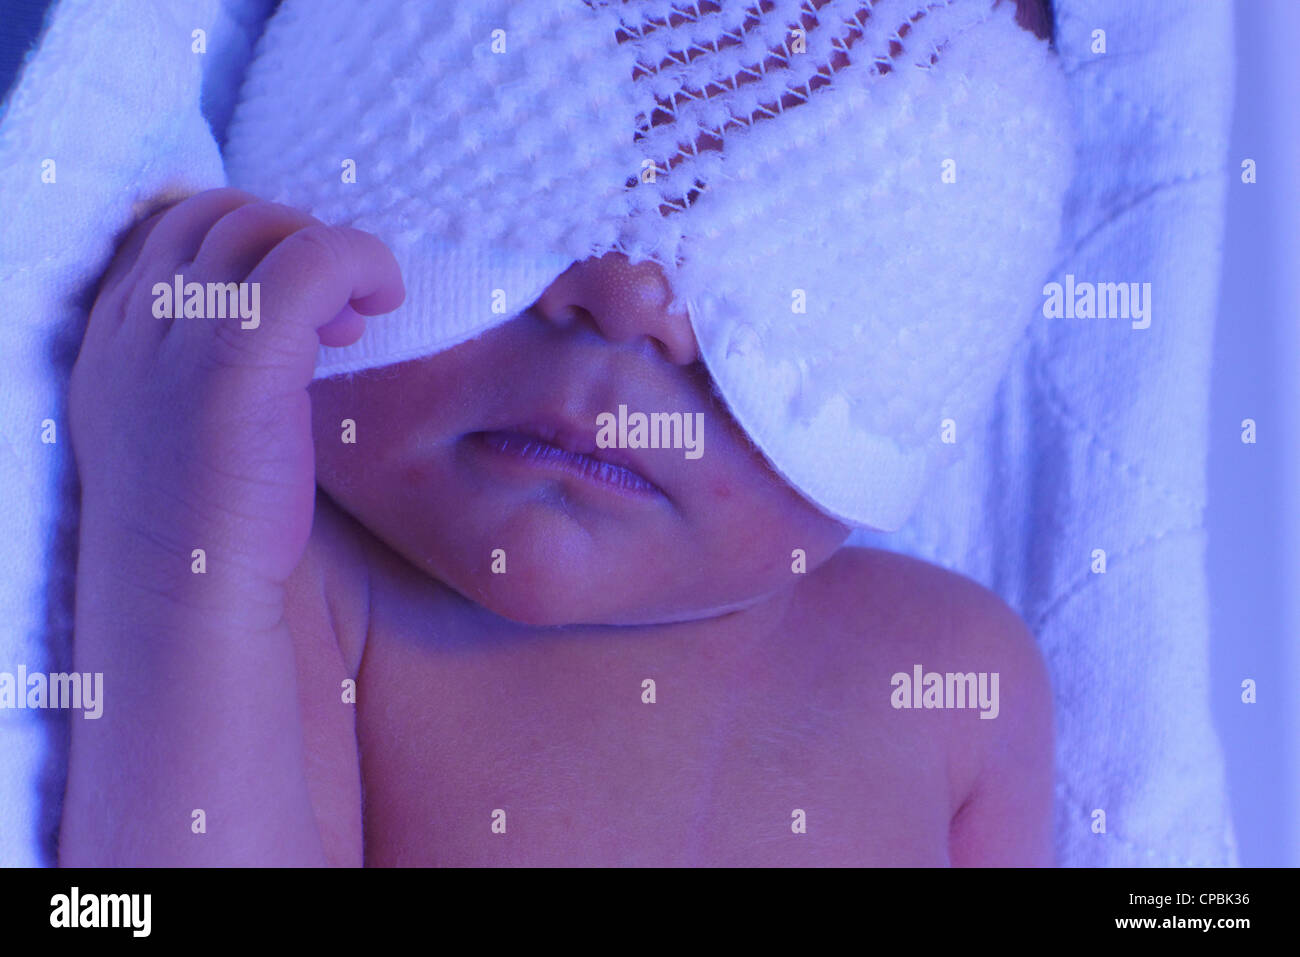 A one day old baby having photo therapy for jaundice Stock Photo